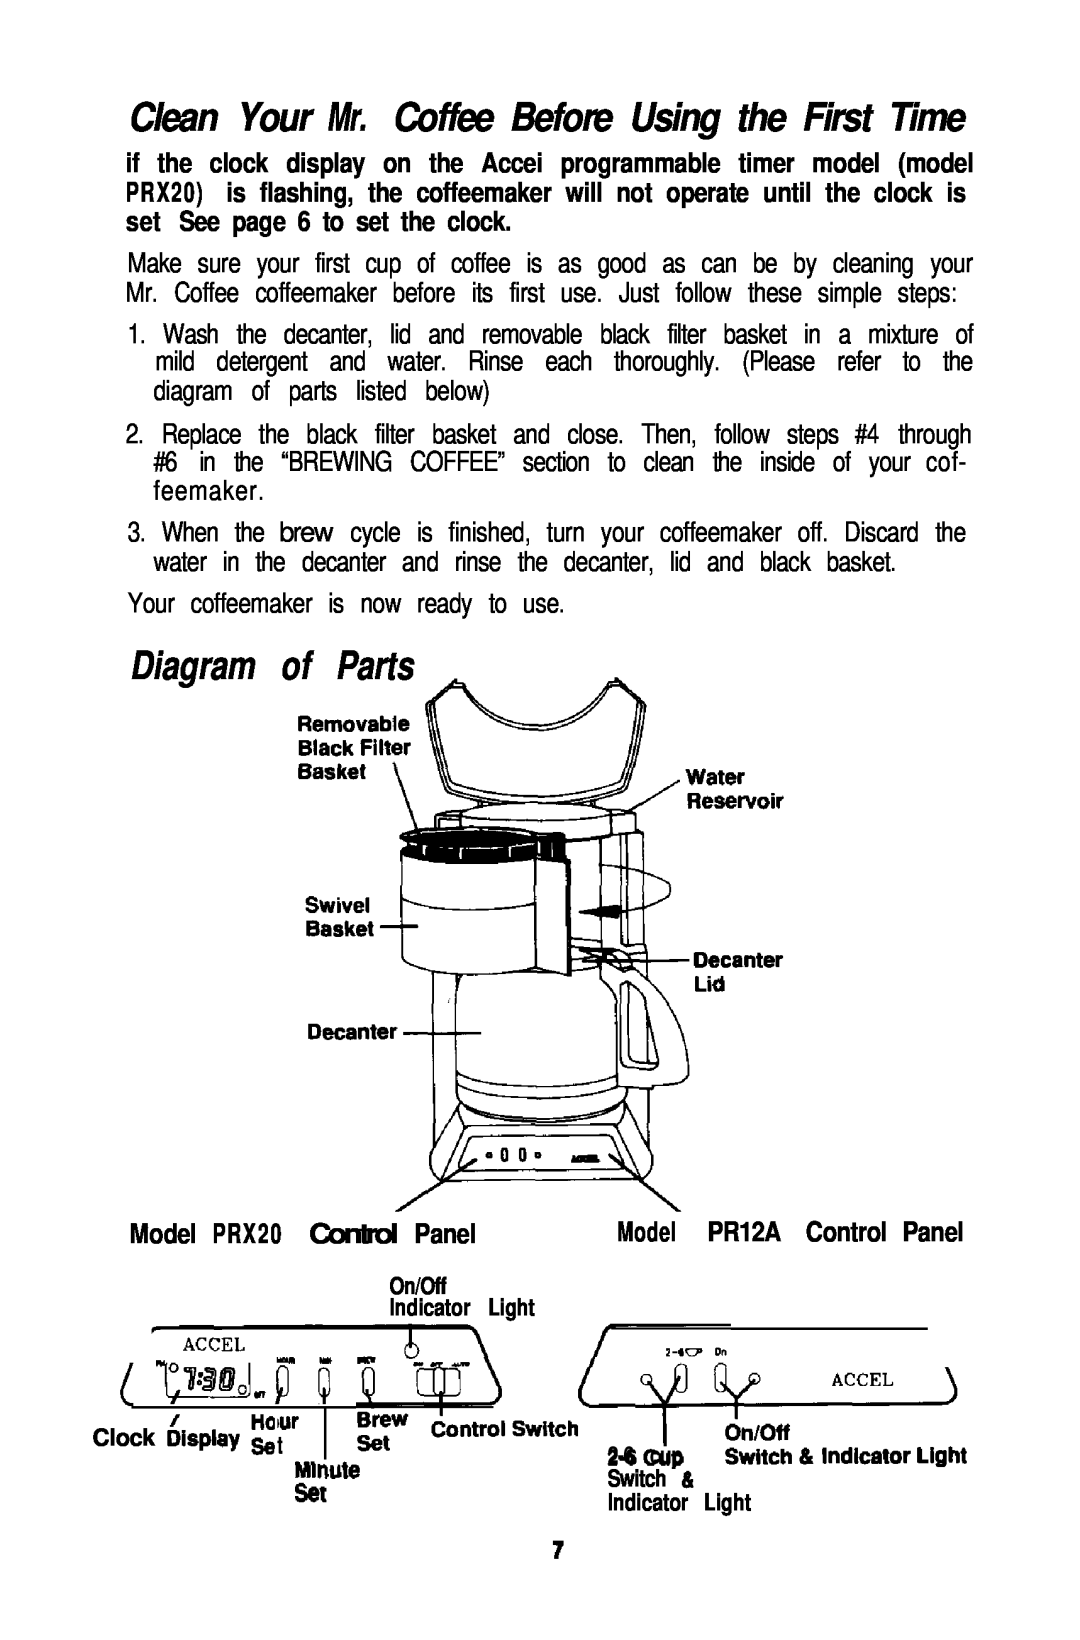 Mr. Coffee PRX20, PR12A operating instructions Diagram of Parts, Clean Your Mr. Coffee Before Using the First Time 